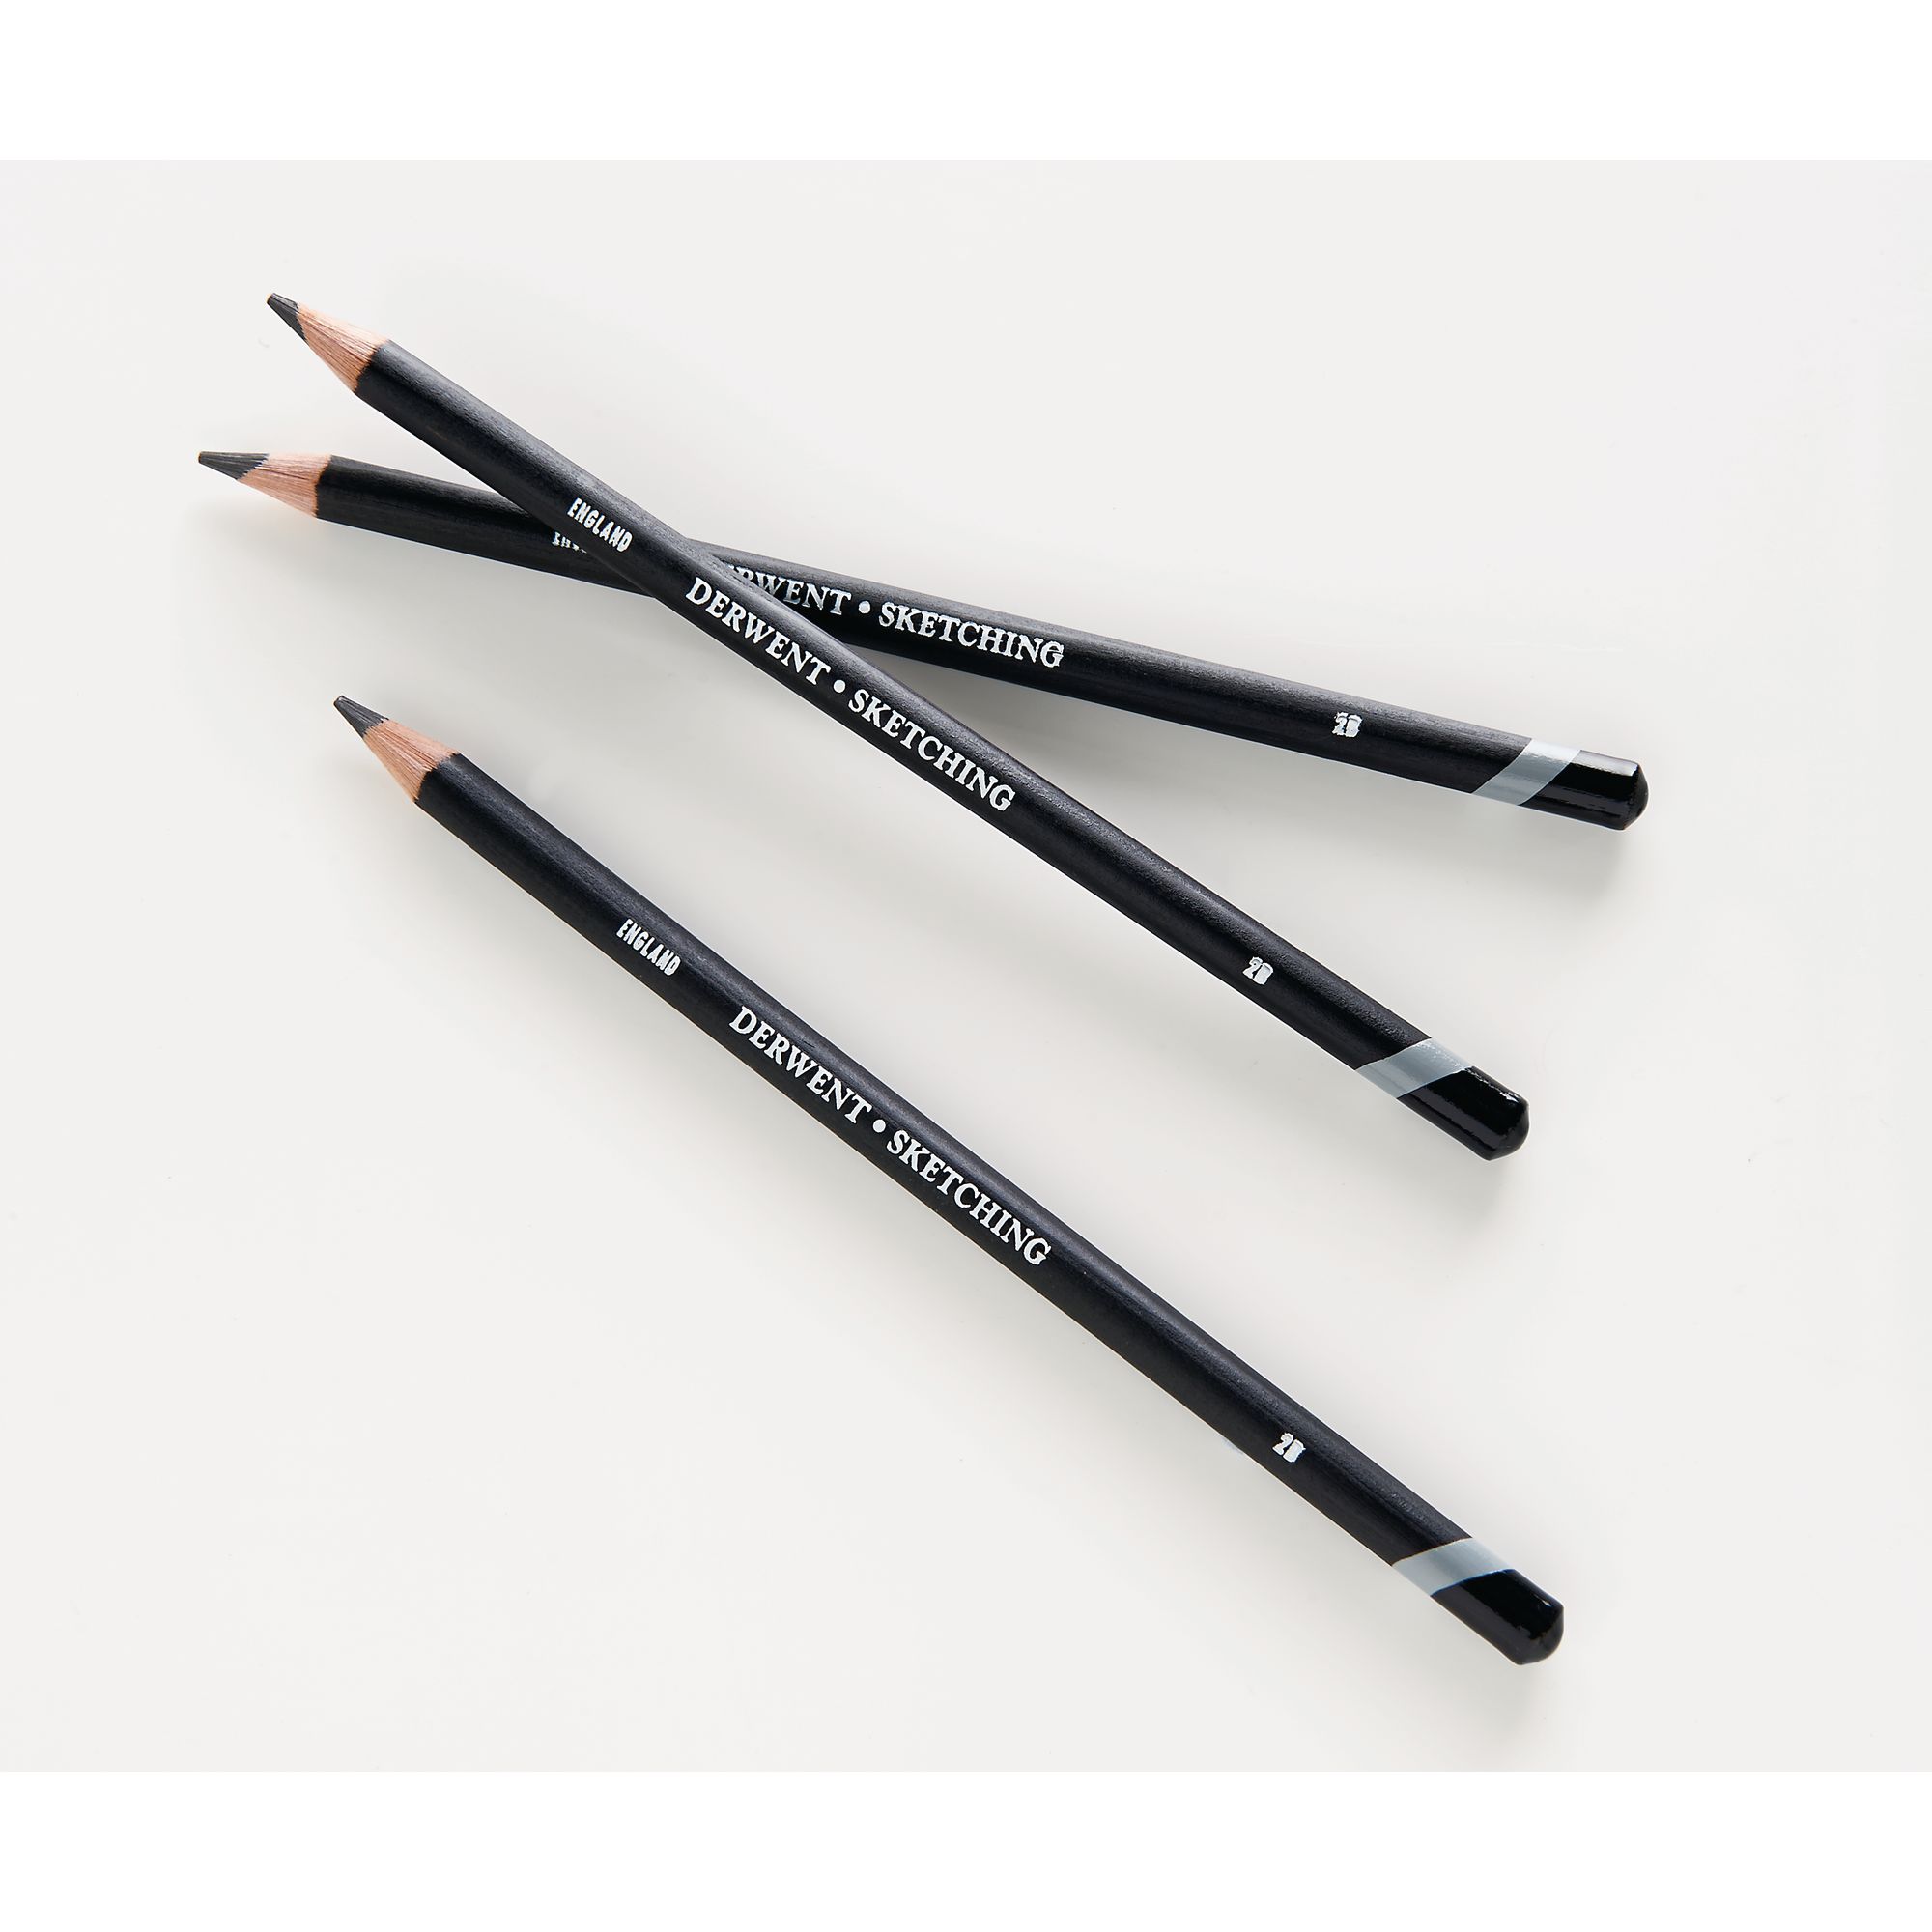 Two drawing pencils on a black and white surface. Photograph by Michalakis  Ppalis - Fine Art America